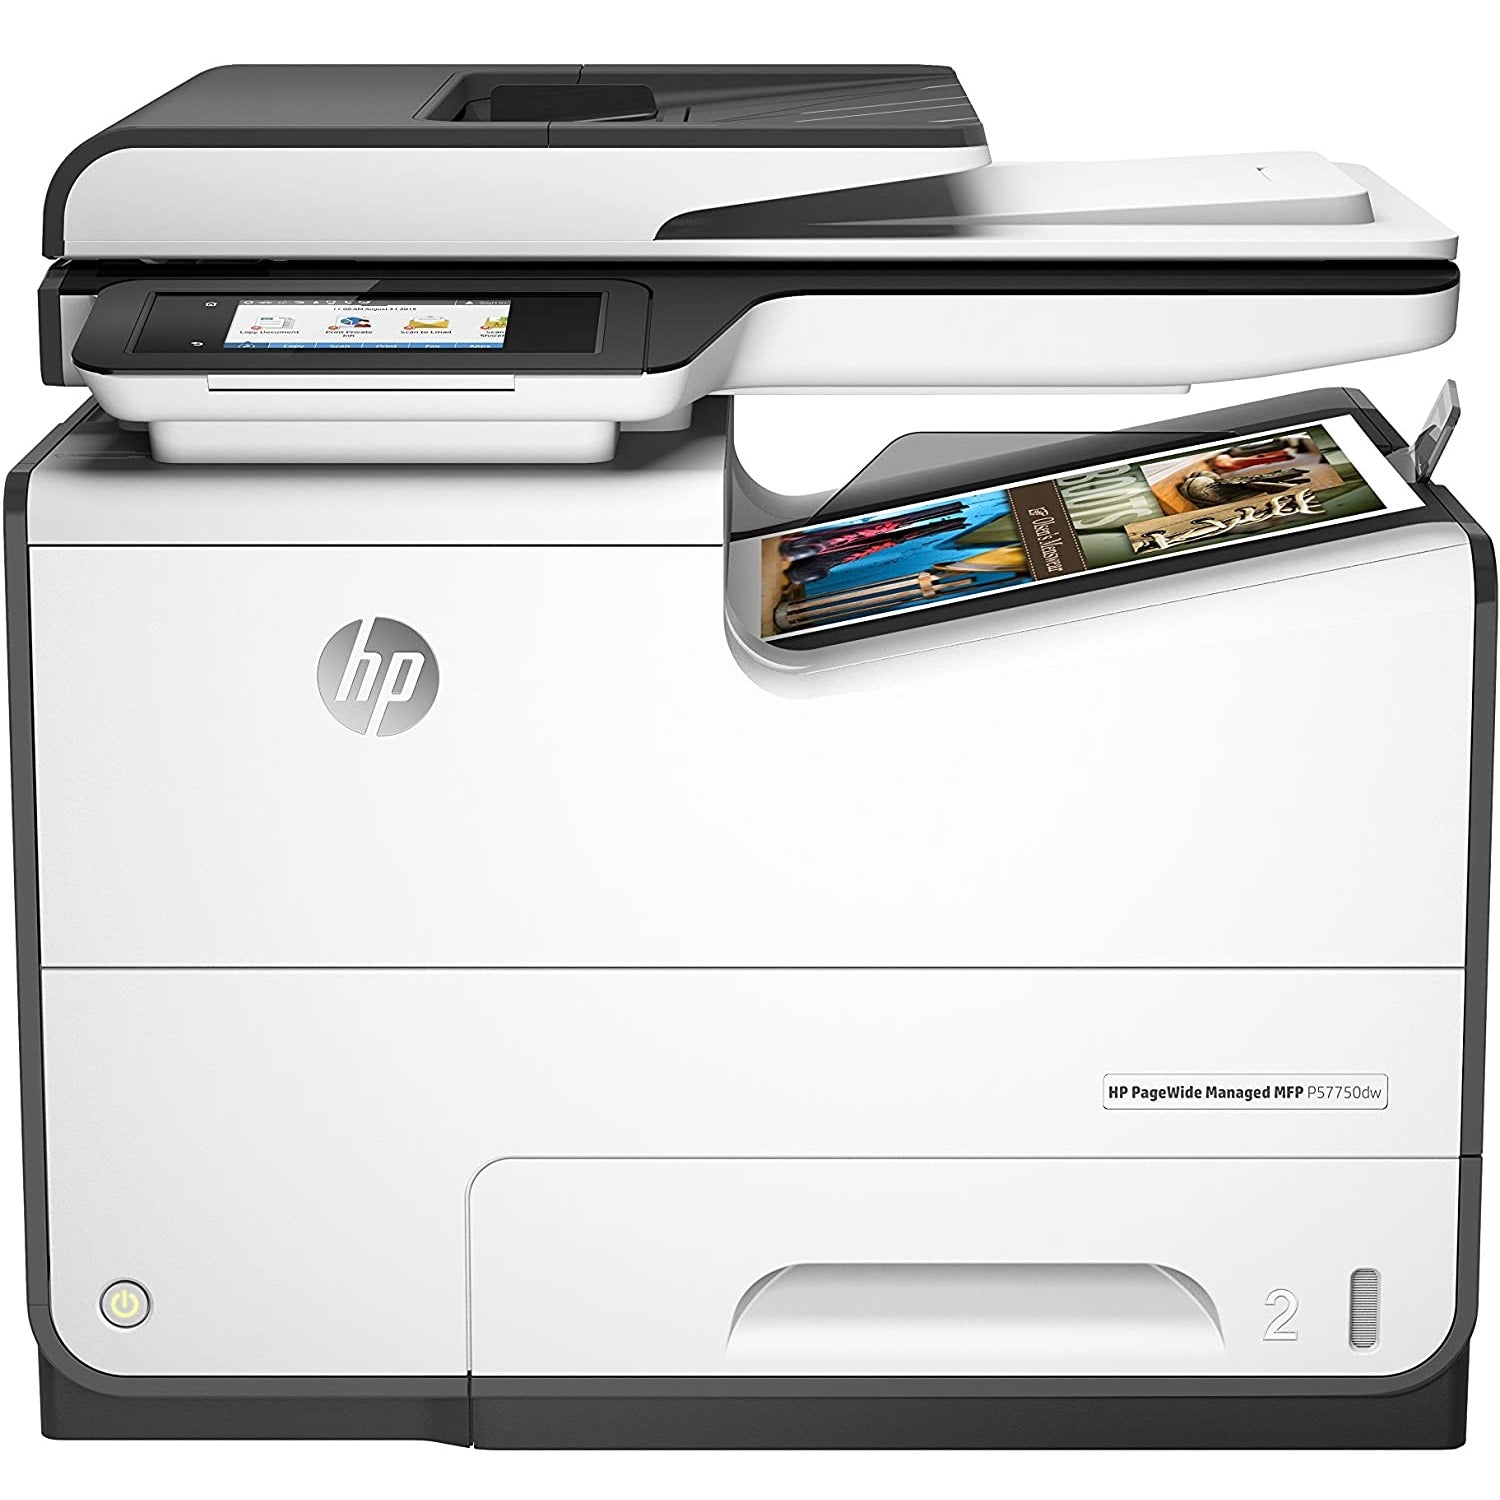 HP PageWide Managed P57750dw Multifunction Printer for Sale by Absolute Toner